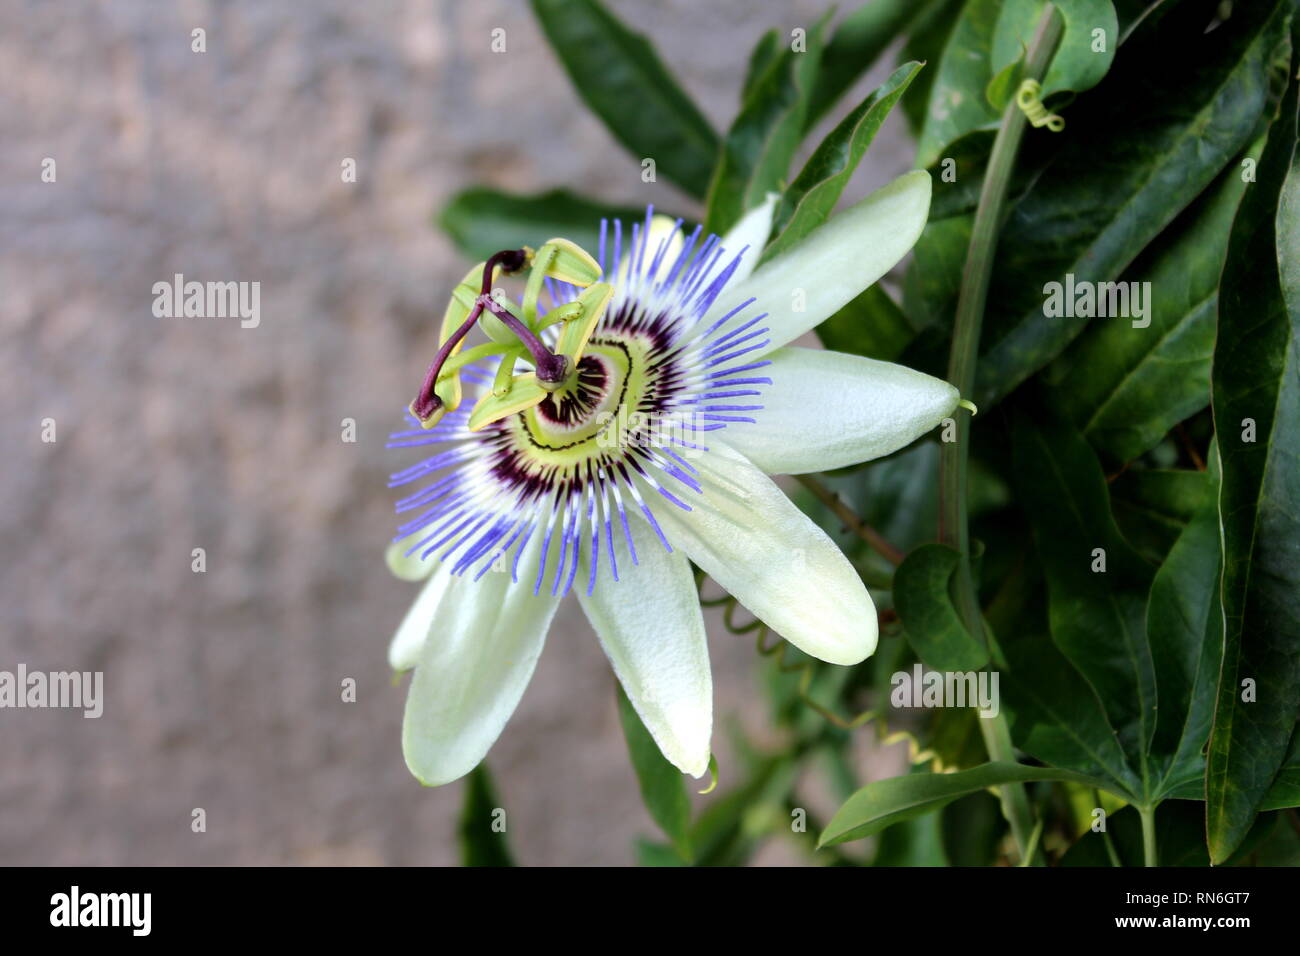 Blooming fully open beautiful unusual Passion fruit or Passiflora edulis or Maracuja or Parcha or Grenadille or Fruit de la passion flower Stock Photo